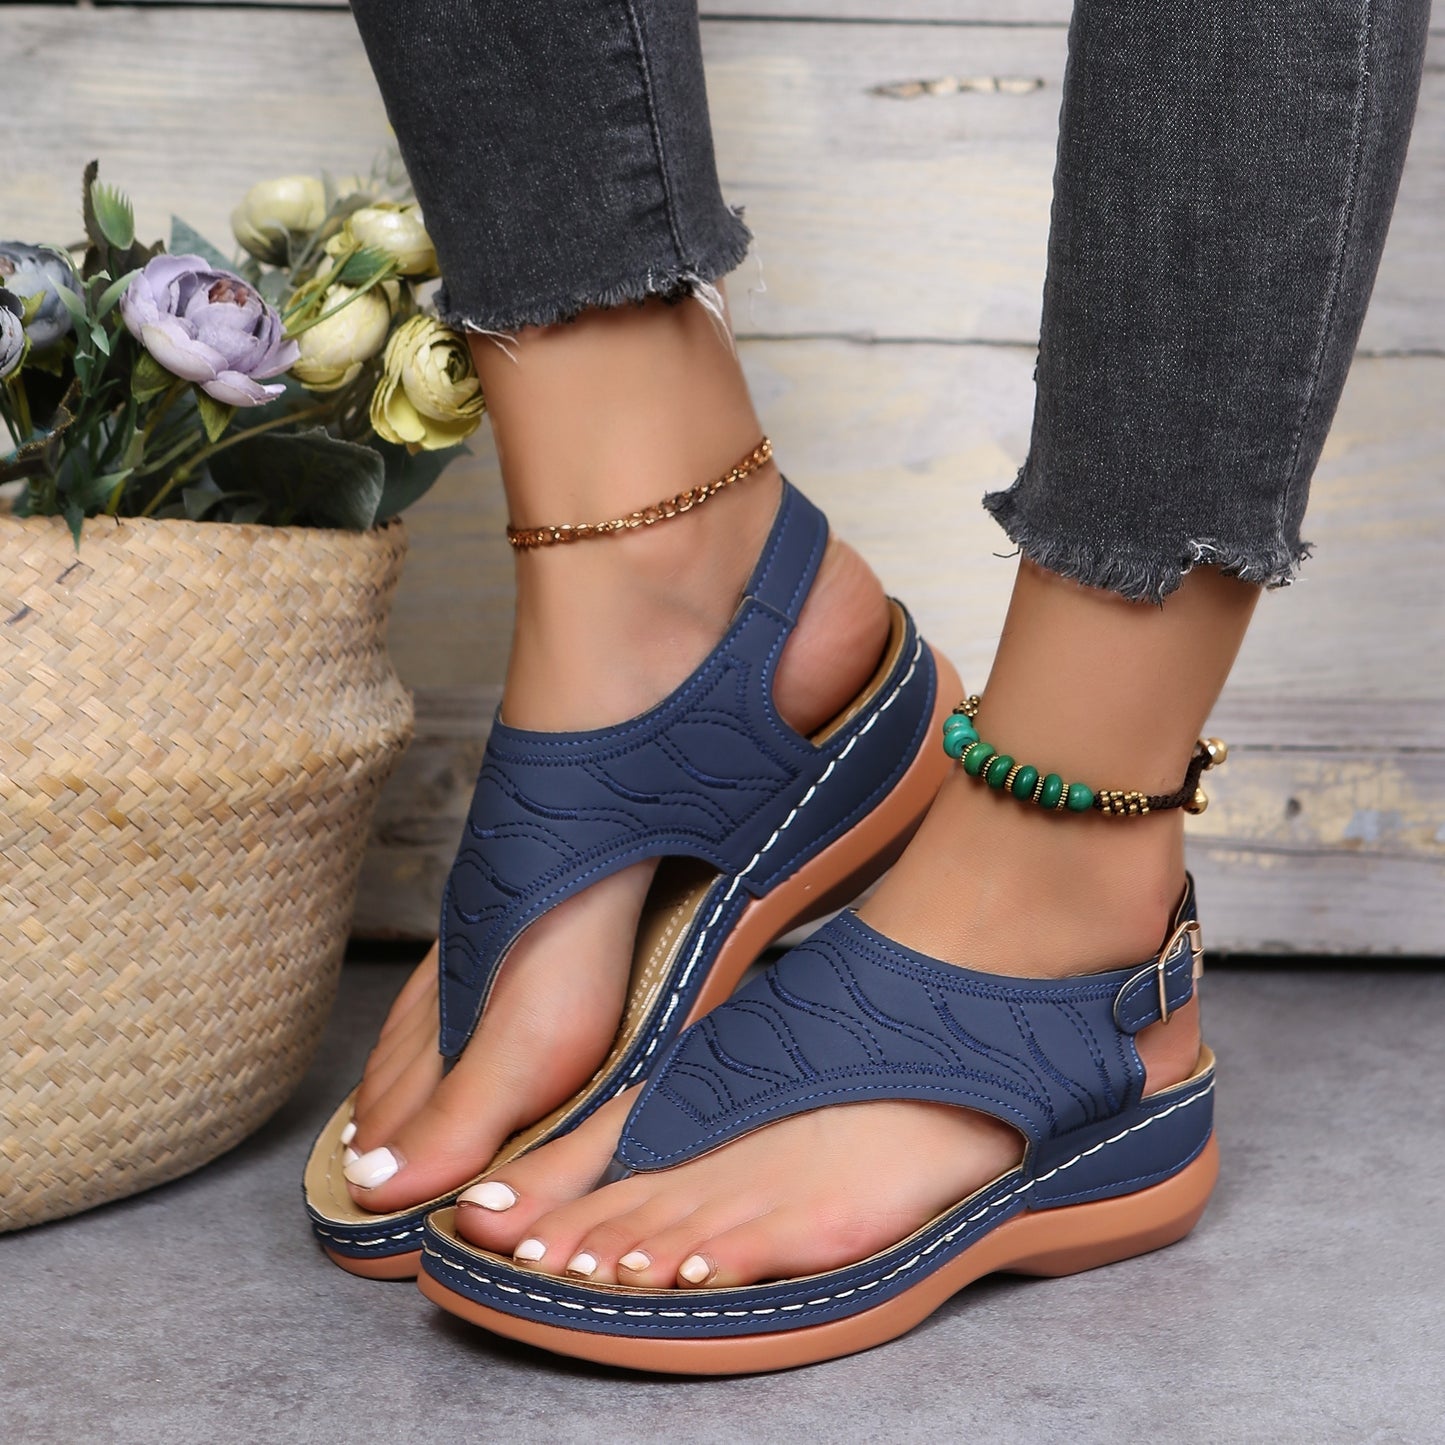 「binfenxie」Women's Stylish Wedge Heeled Flip Flops - Open Toe Sandals with Ankle Strap for a Casual Look